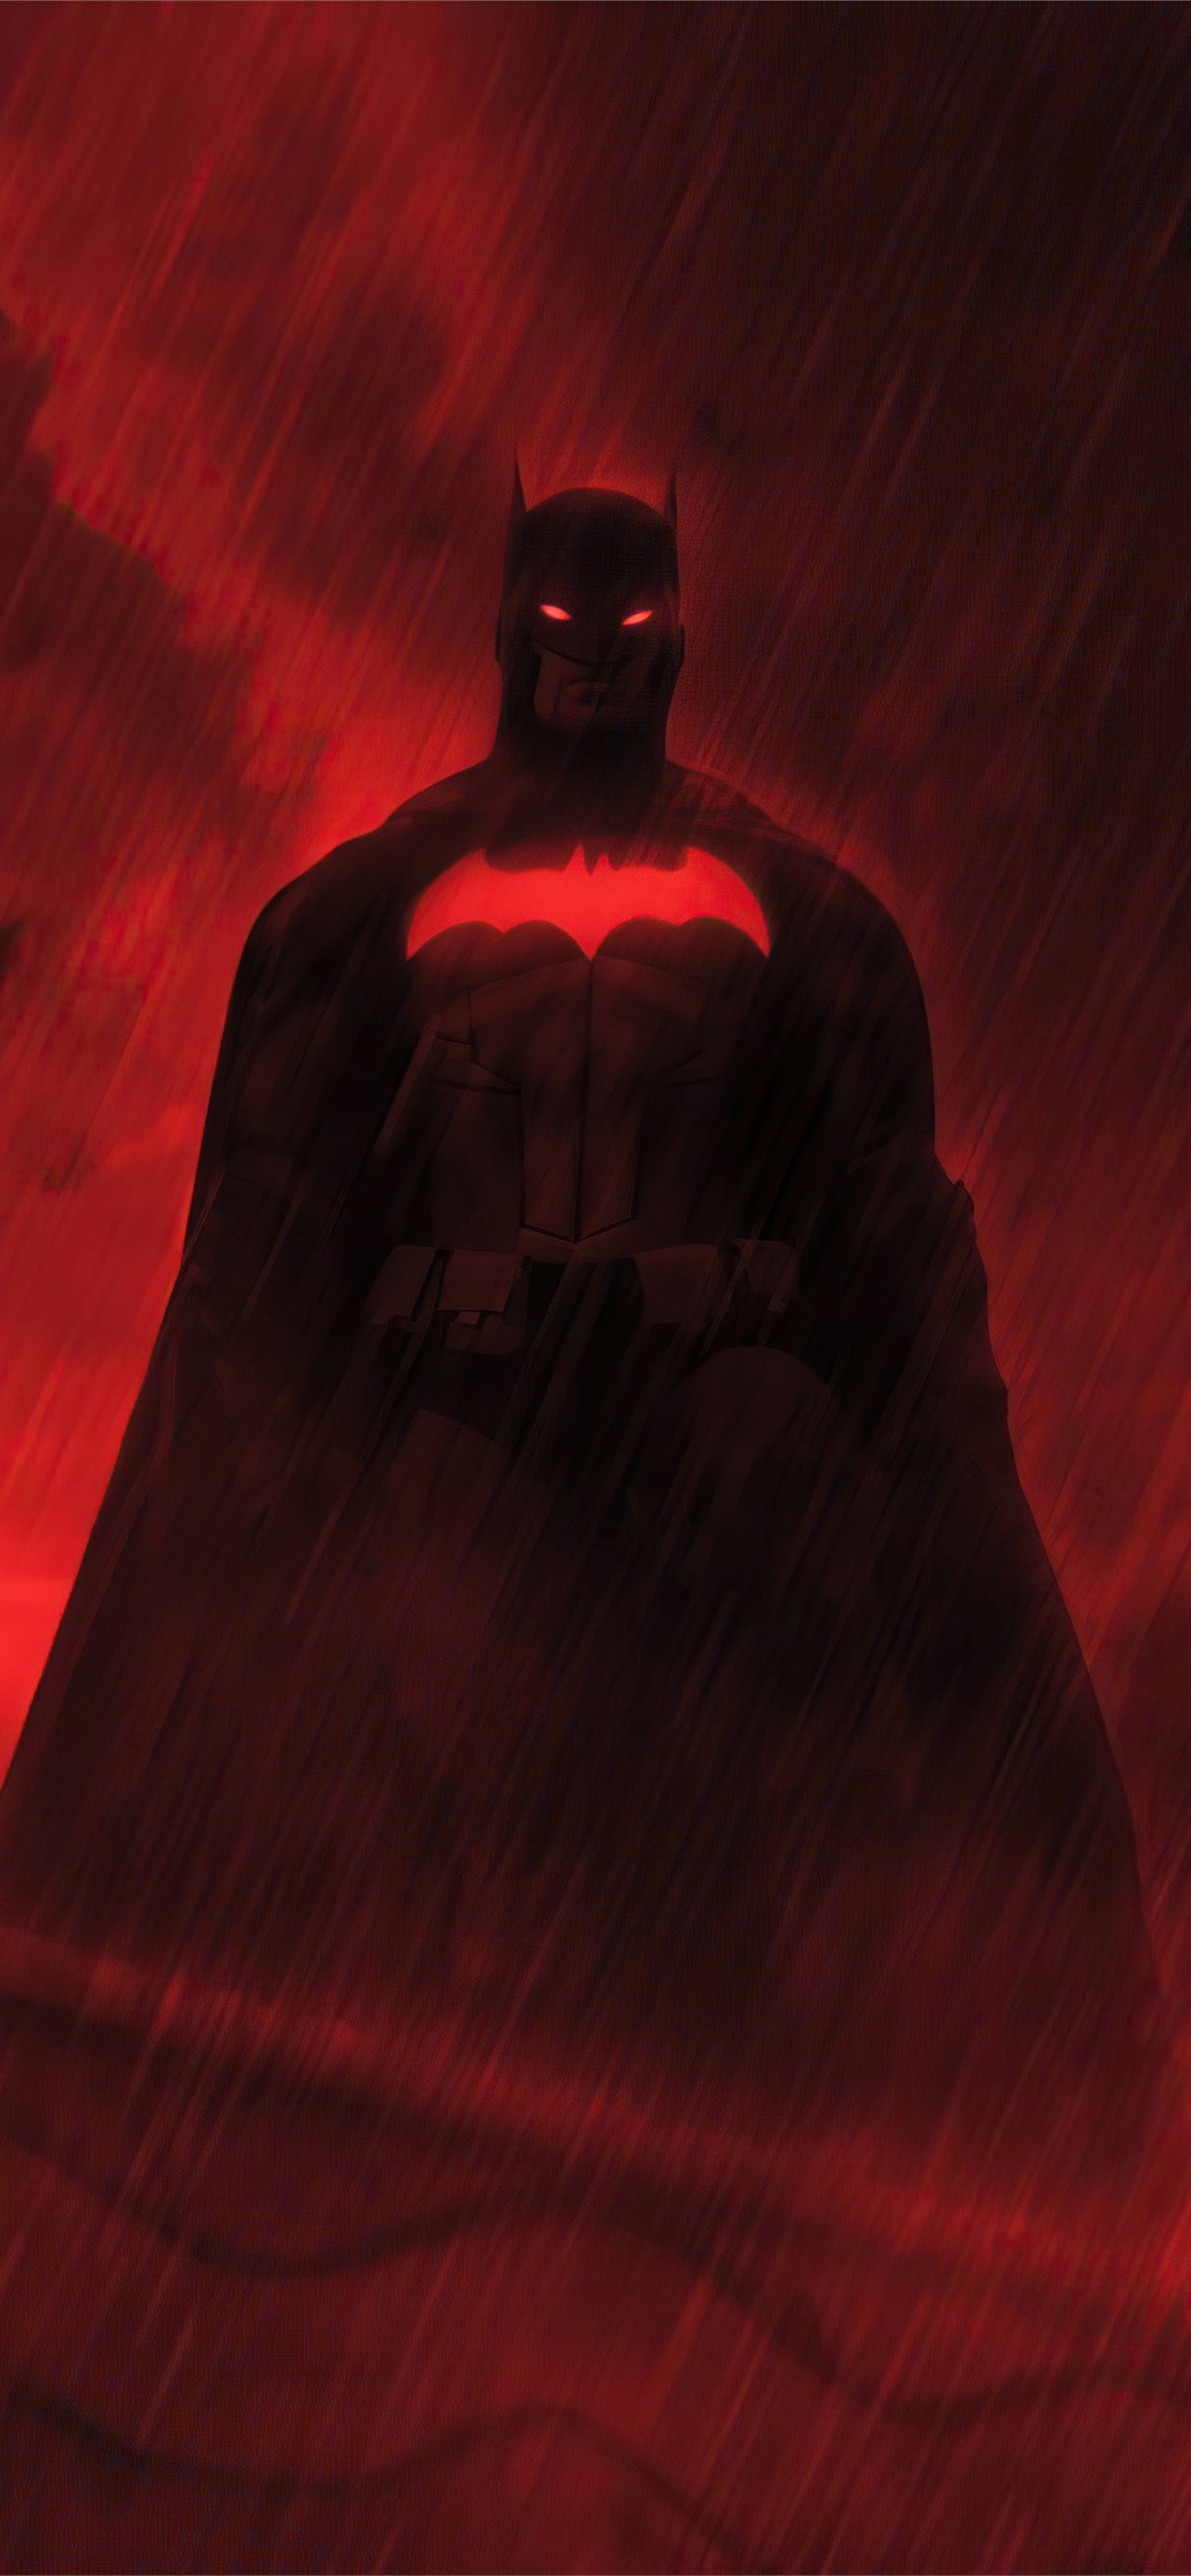 The Batman with red background Wallpaper 4k Ultra HD ID6426